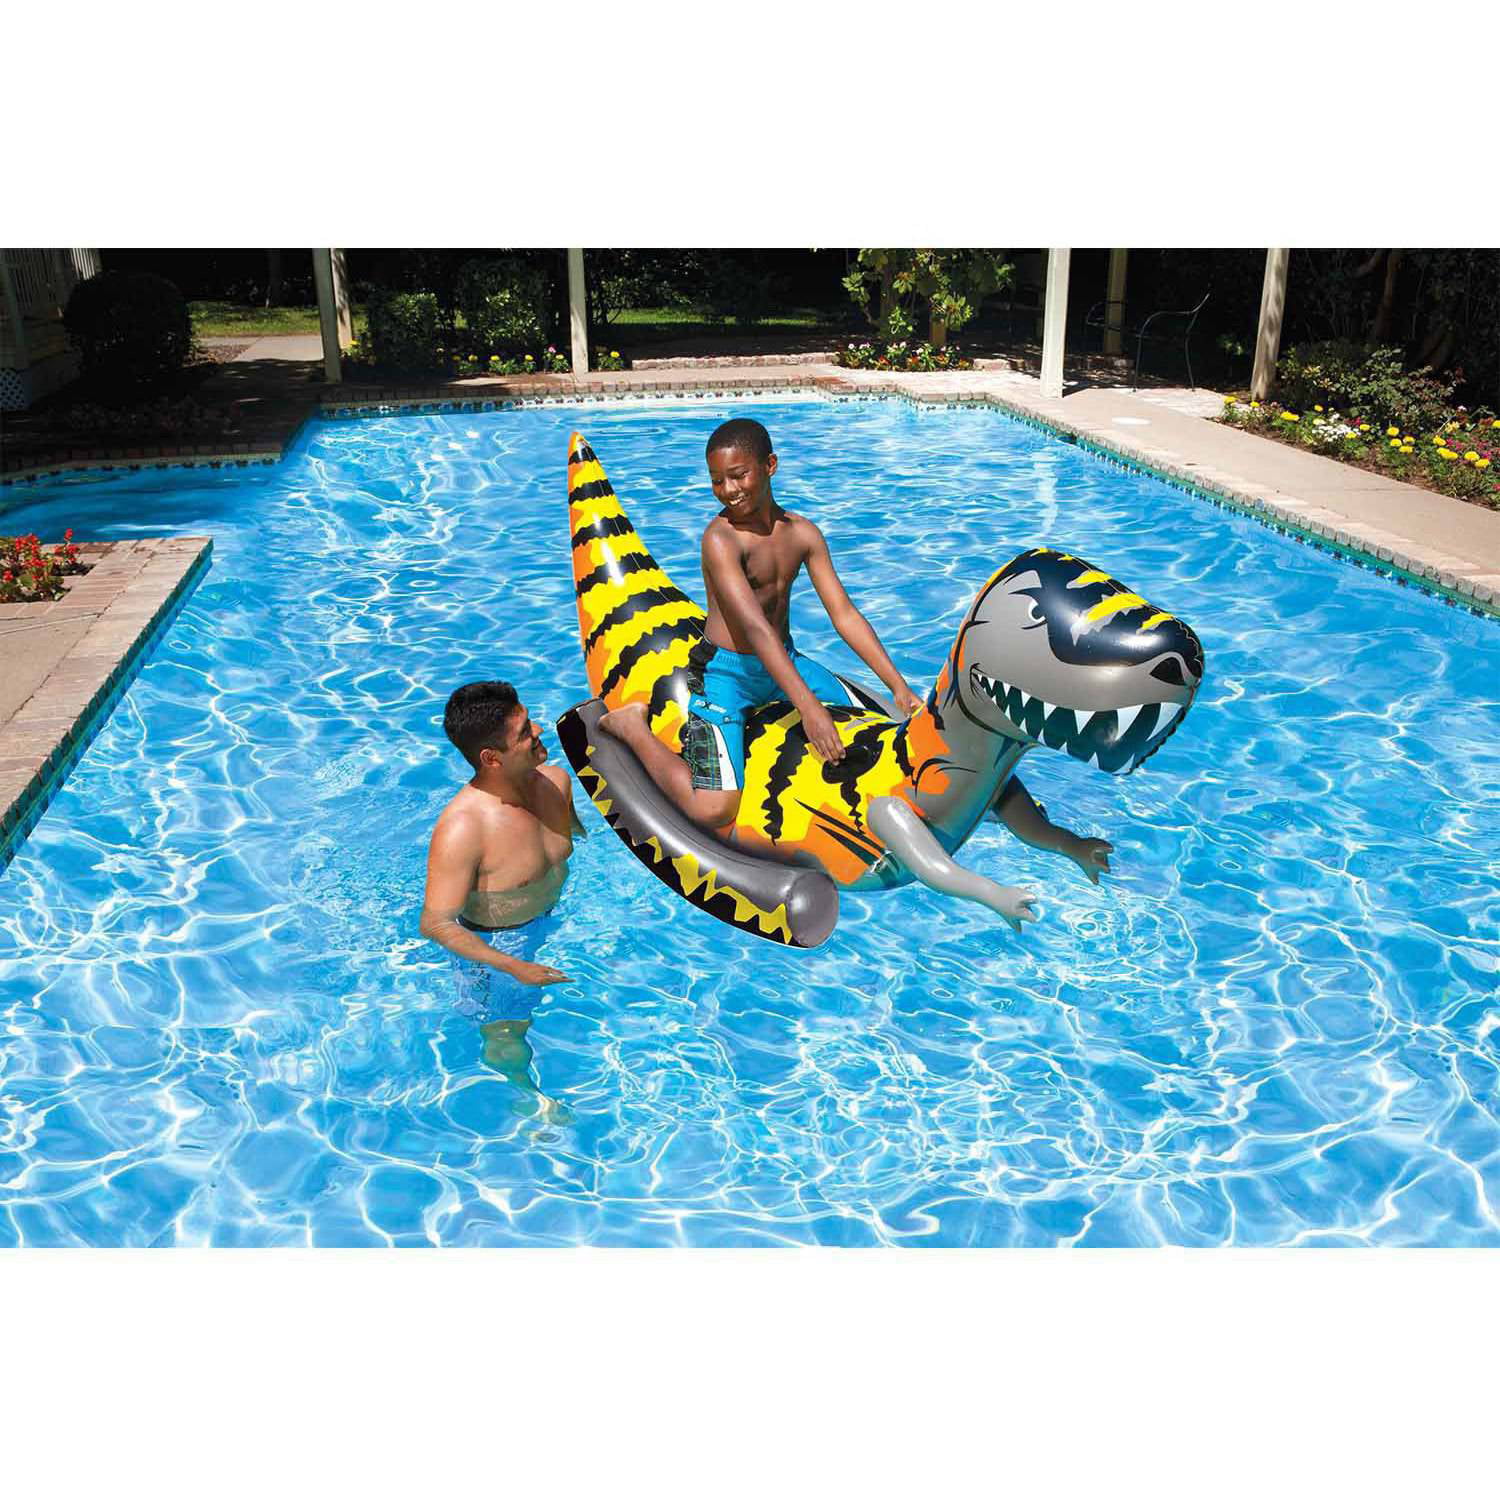 Poolmaster T-Rex Rider Kids Child Swimming Pool Inflatable Floating Water Float 